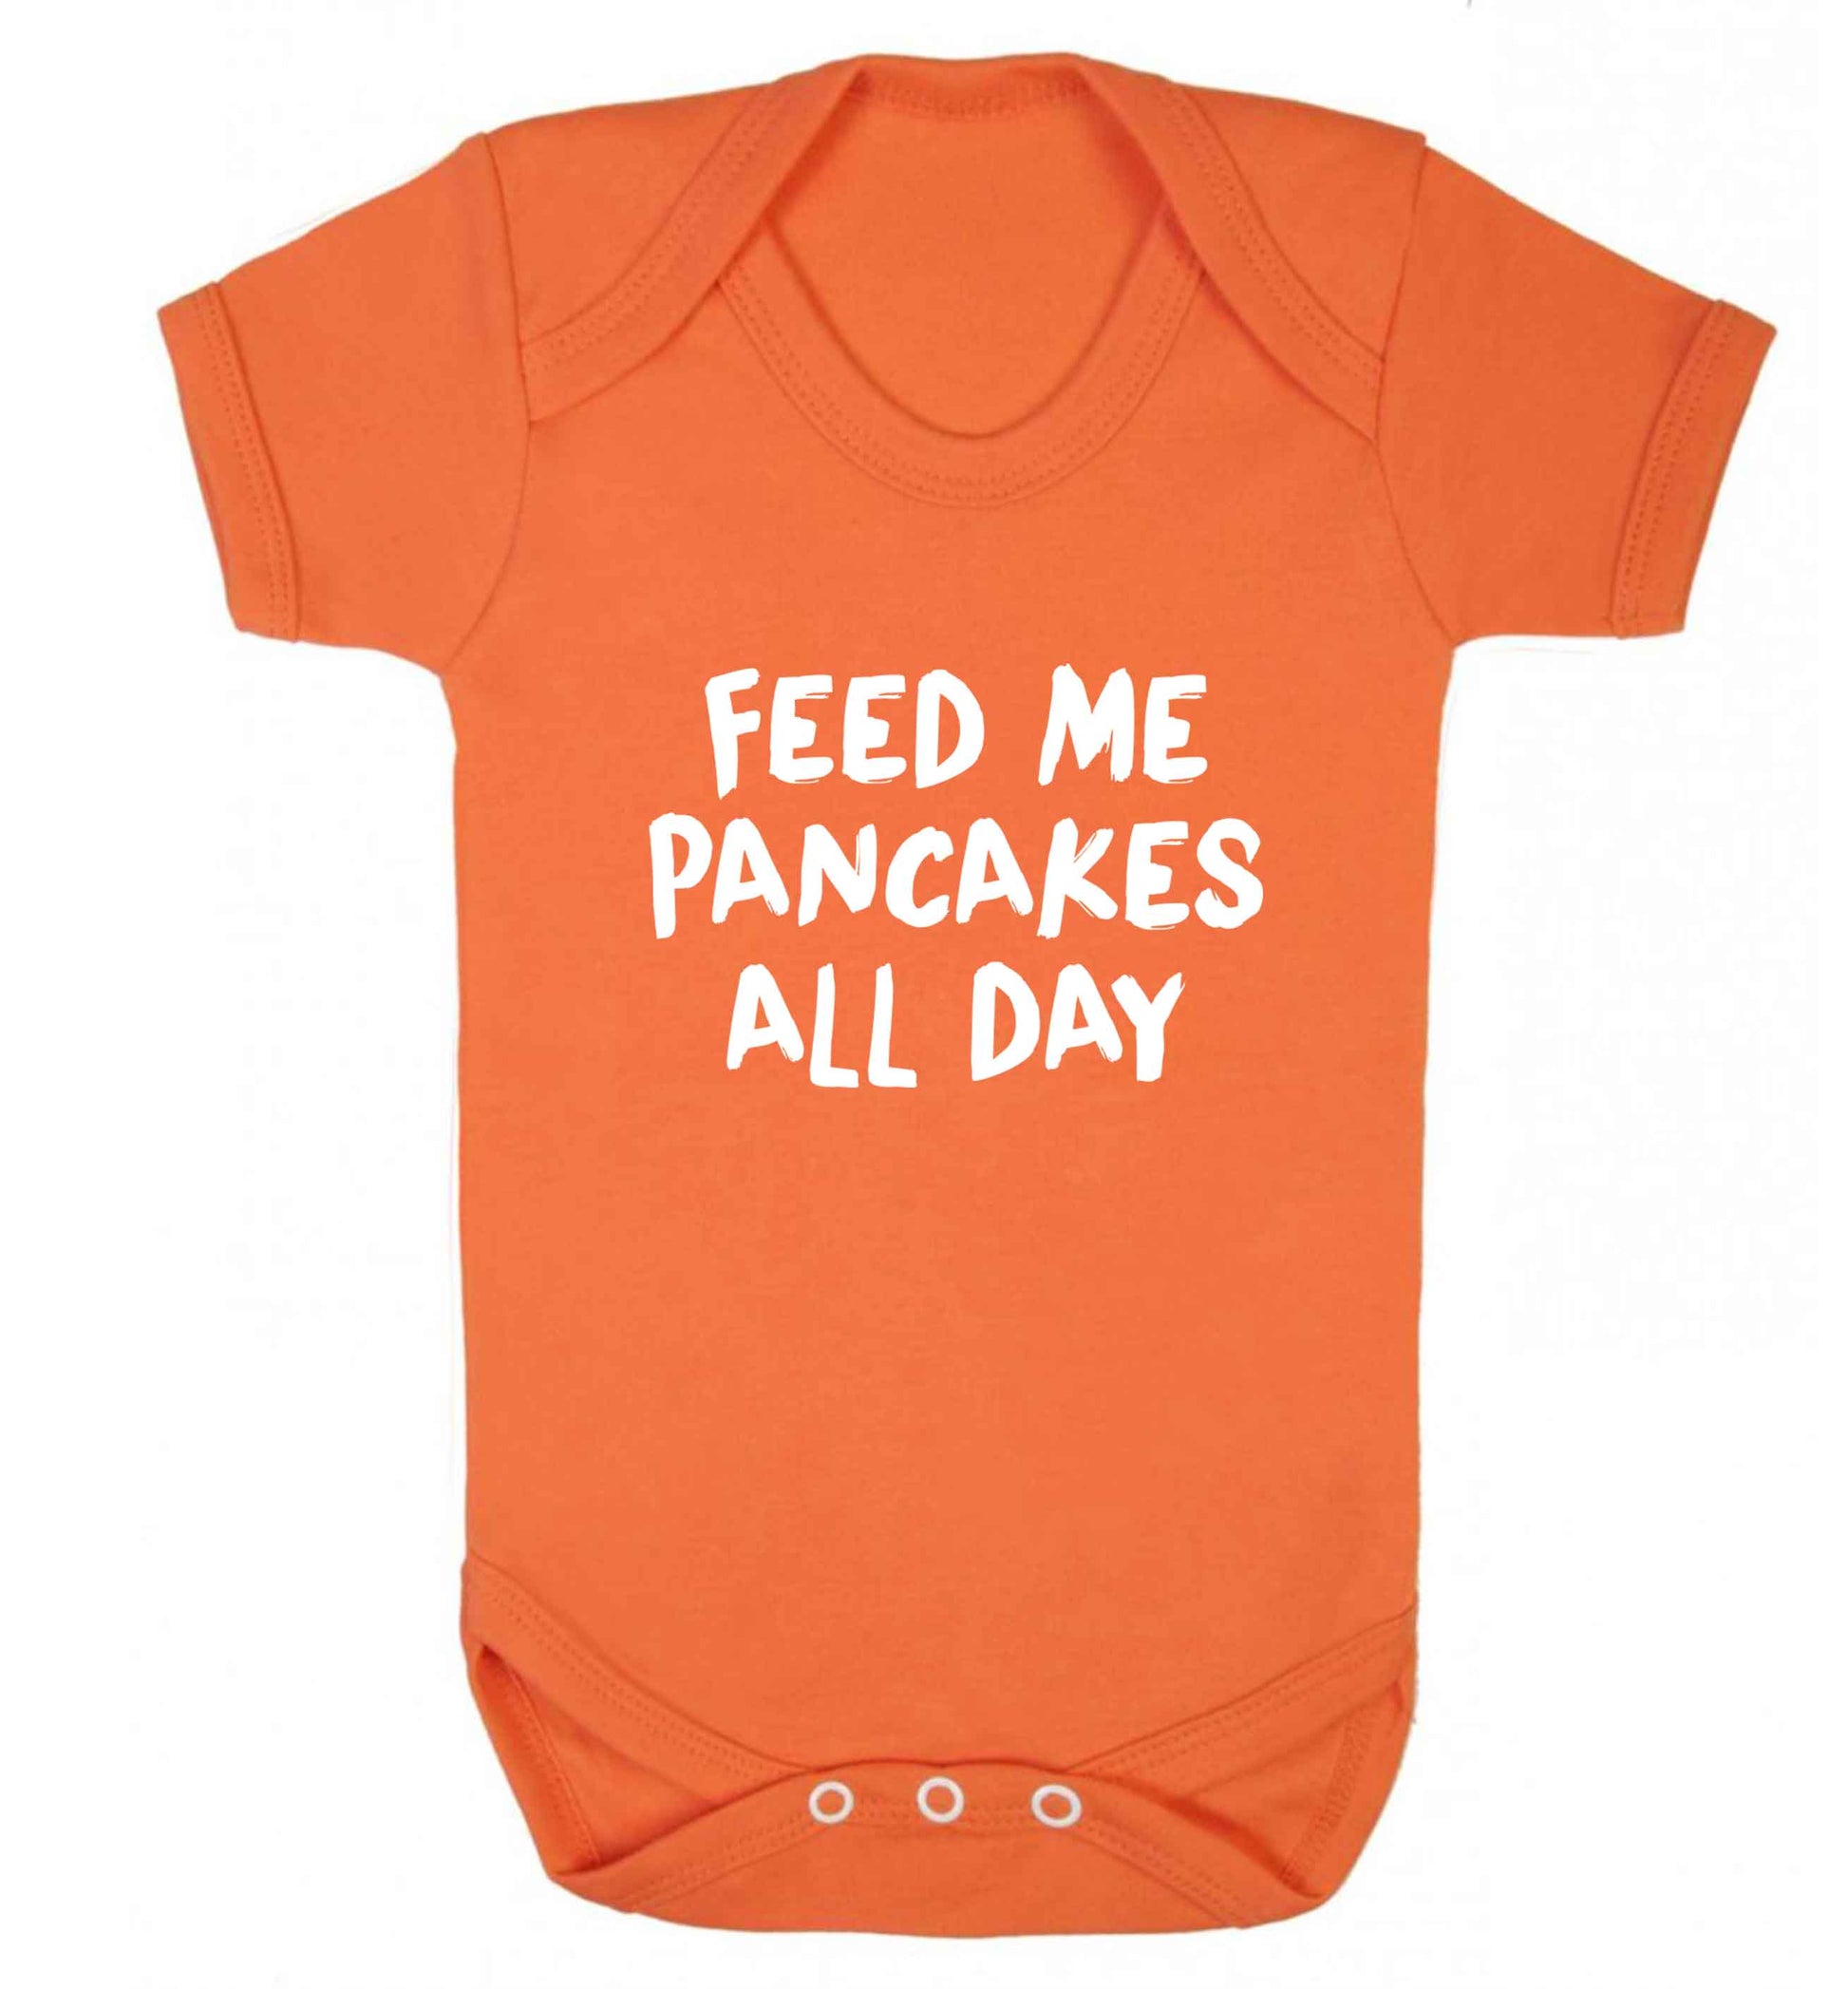 Feed me pancakes all day baby vest orange 18-24 months